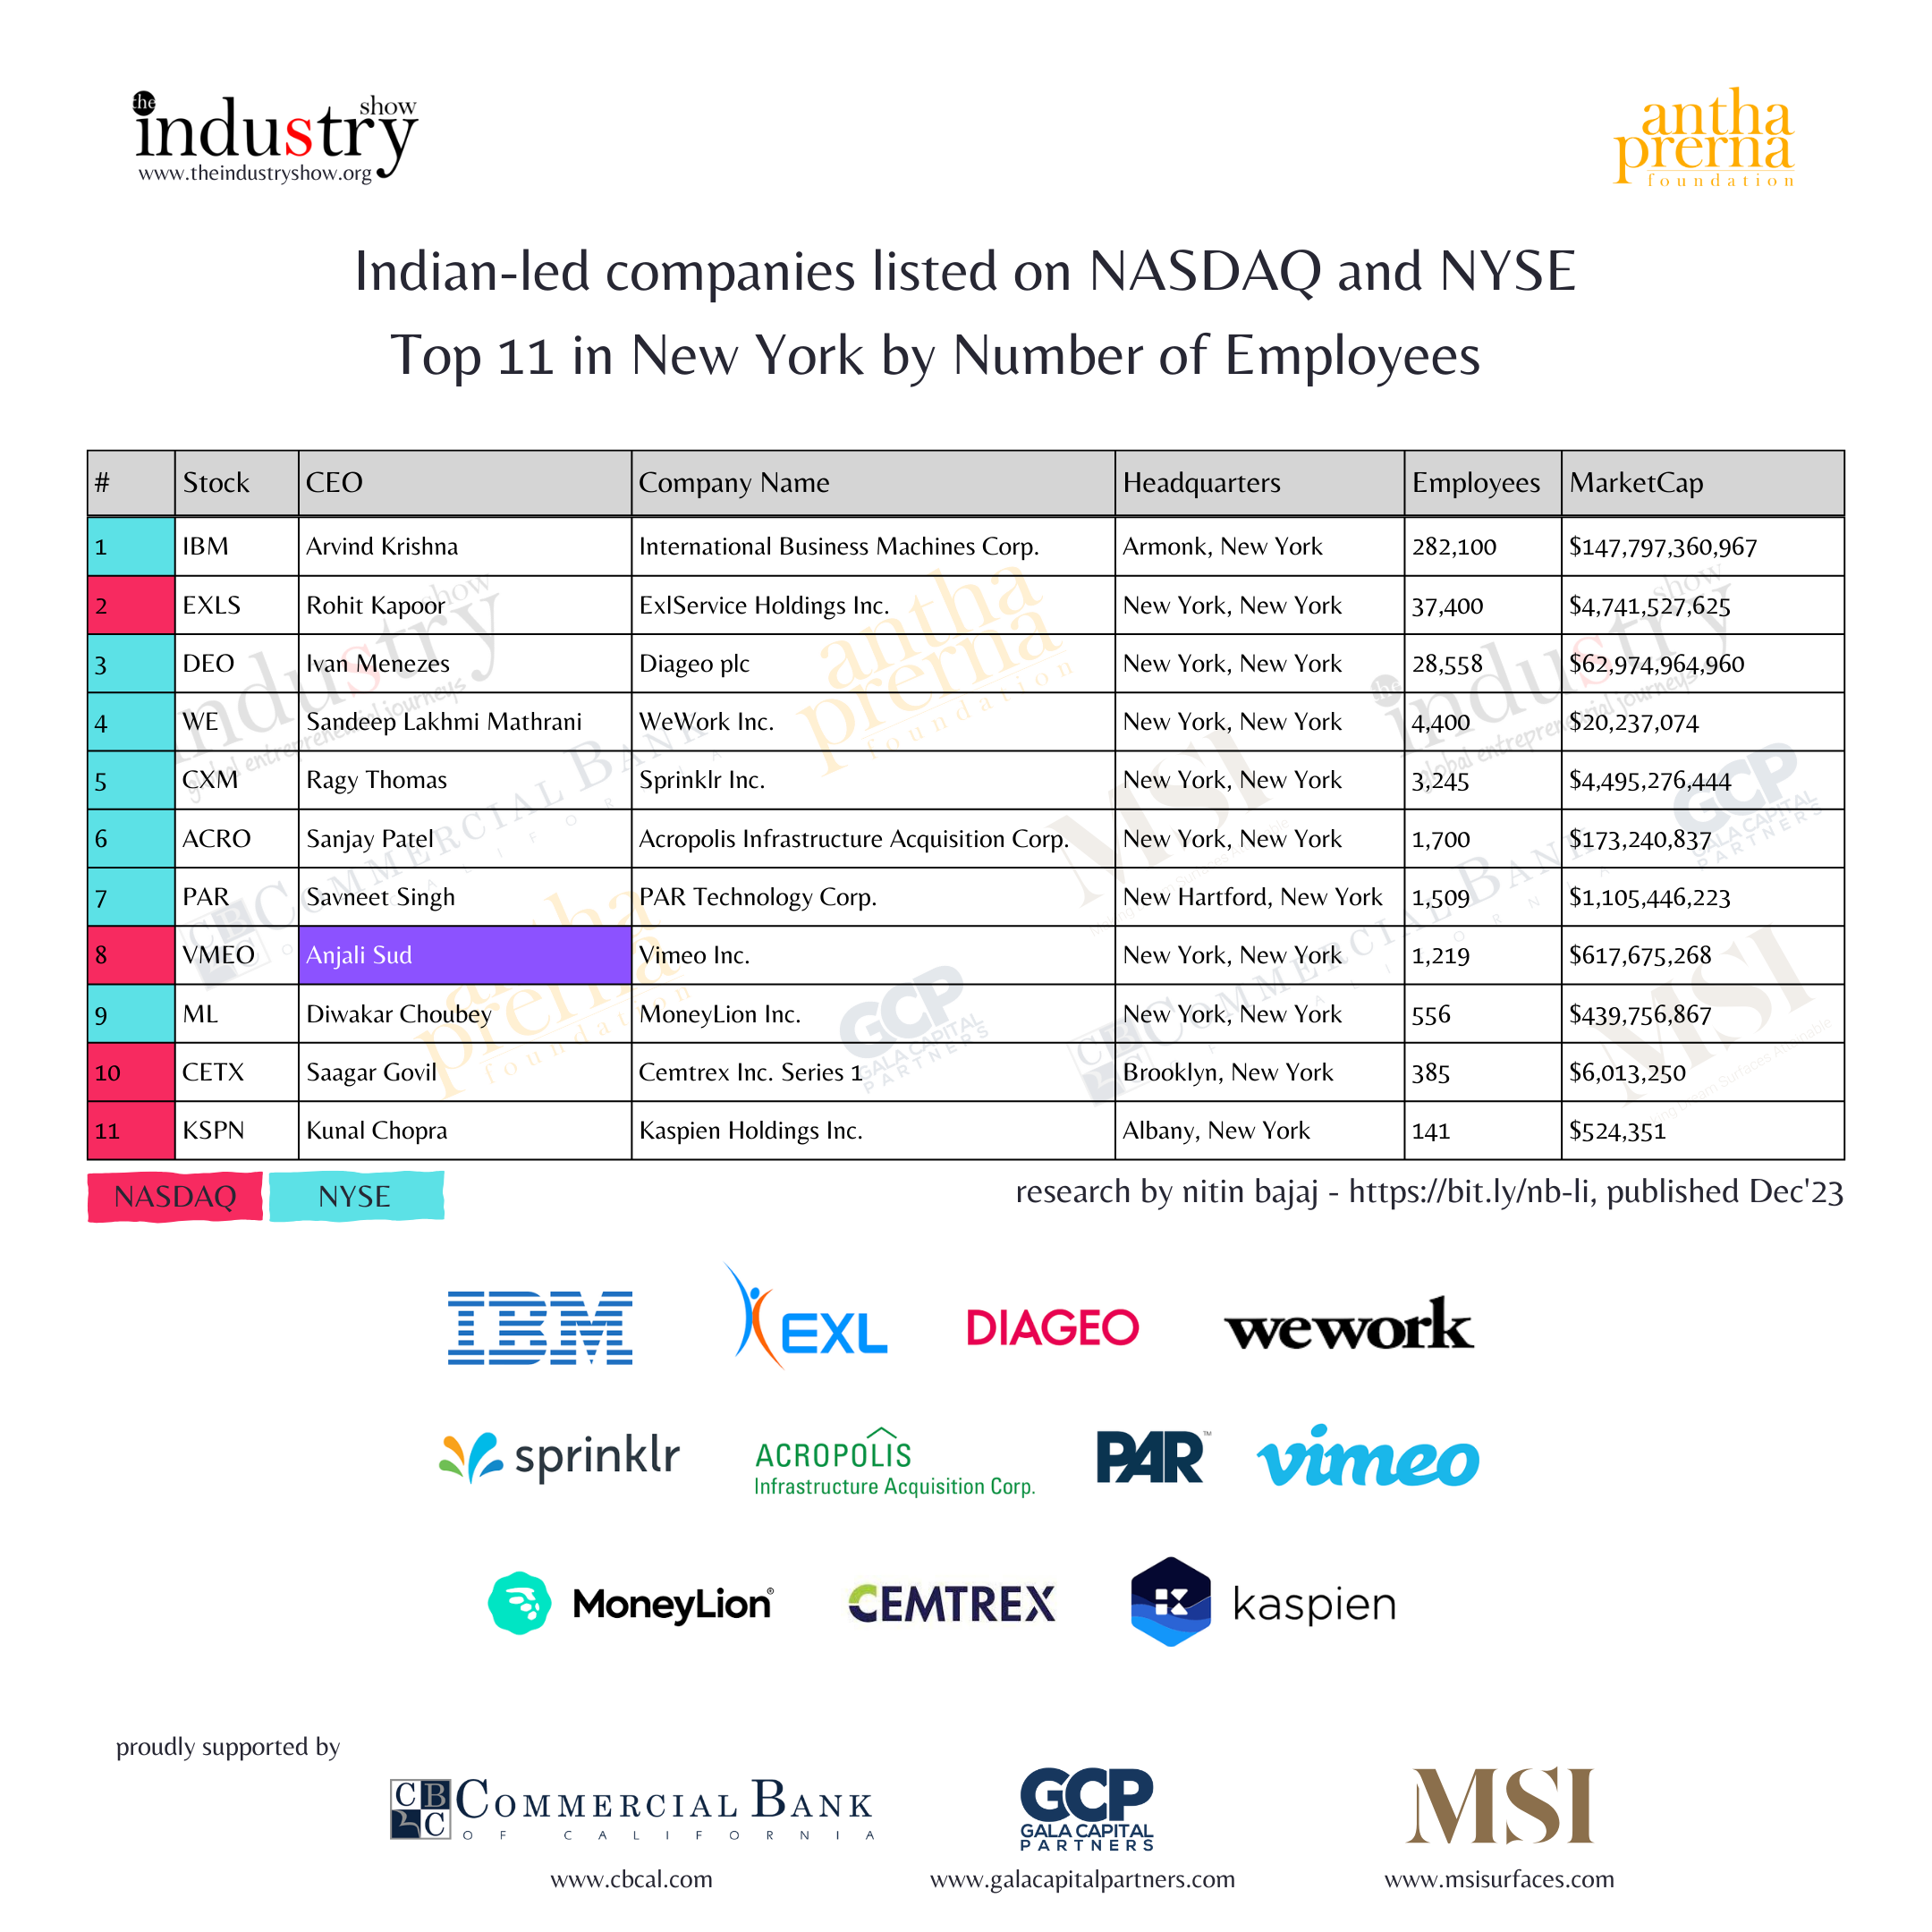 Indian-led companies listed on NASDAQ and NYSE Top 11 in New York by No. of employees